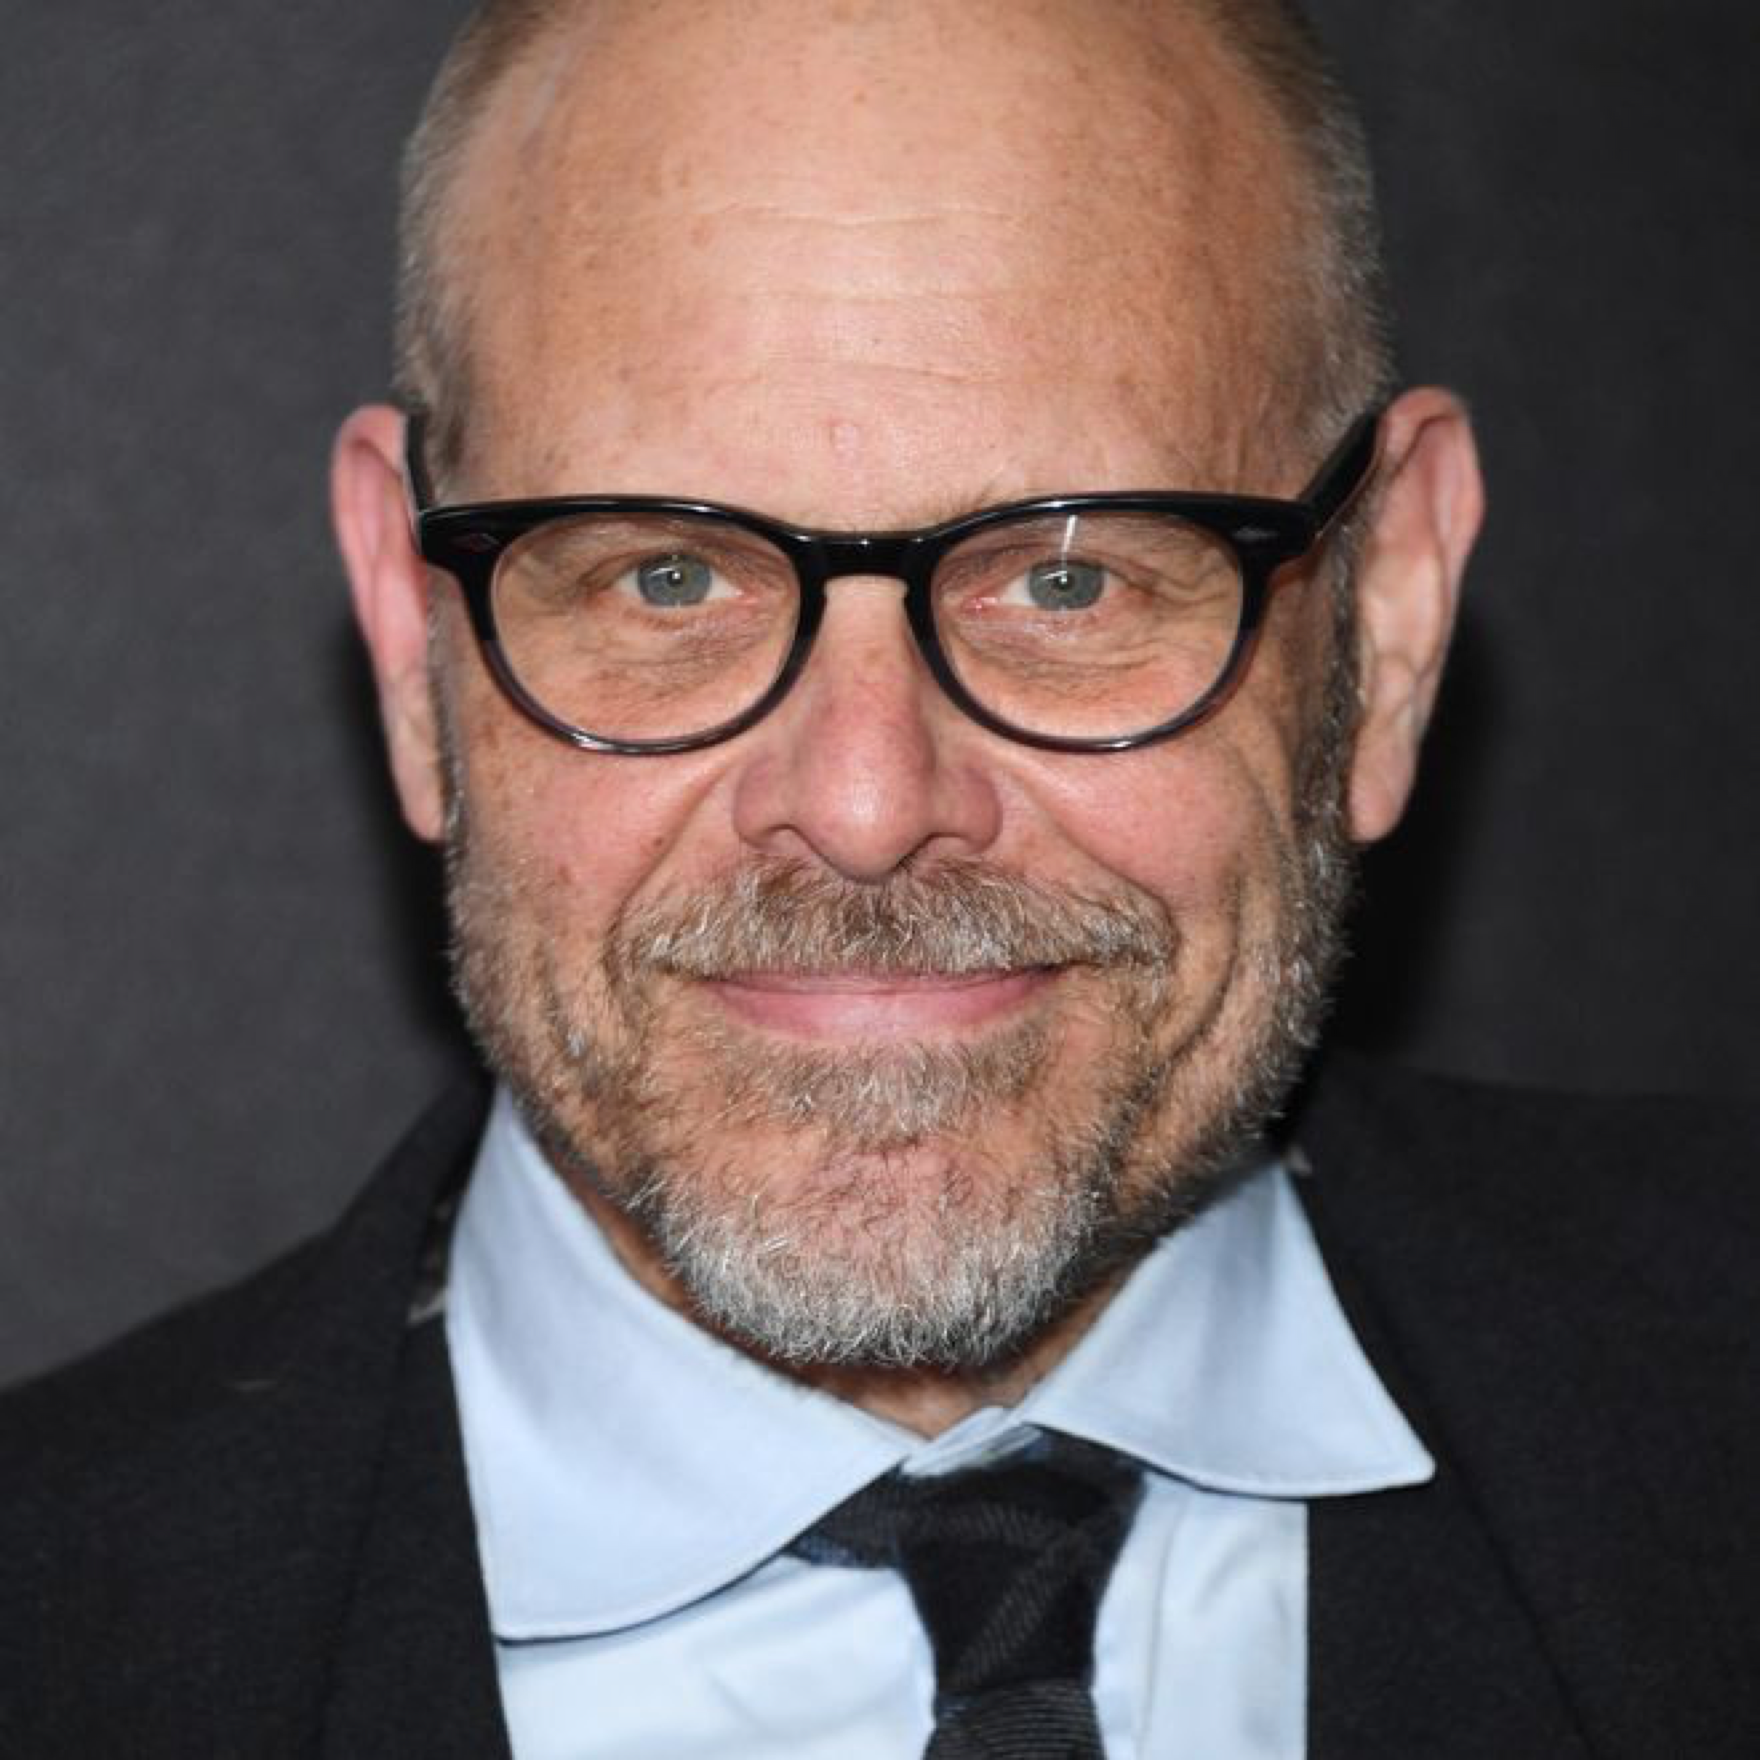 You are currently viewing Alton Brown Apologizes for ‘Flippant’ Holocaust Tweets